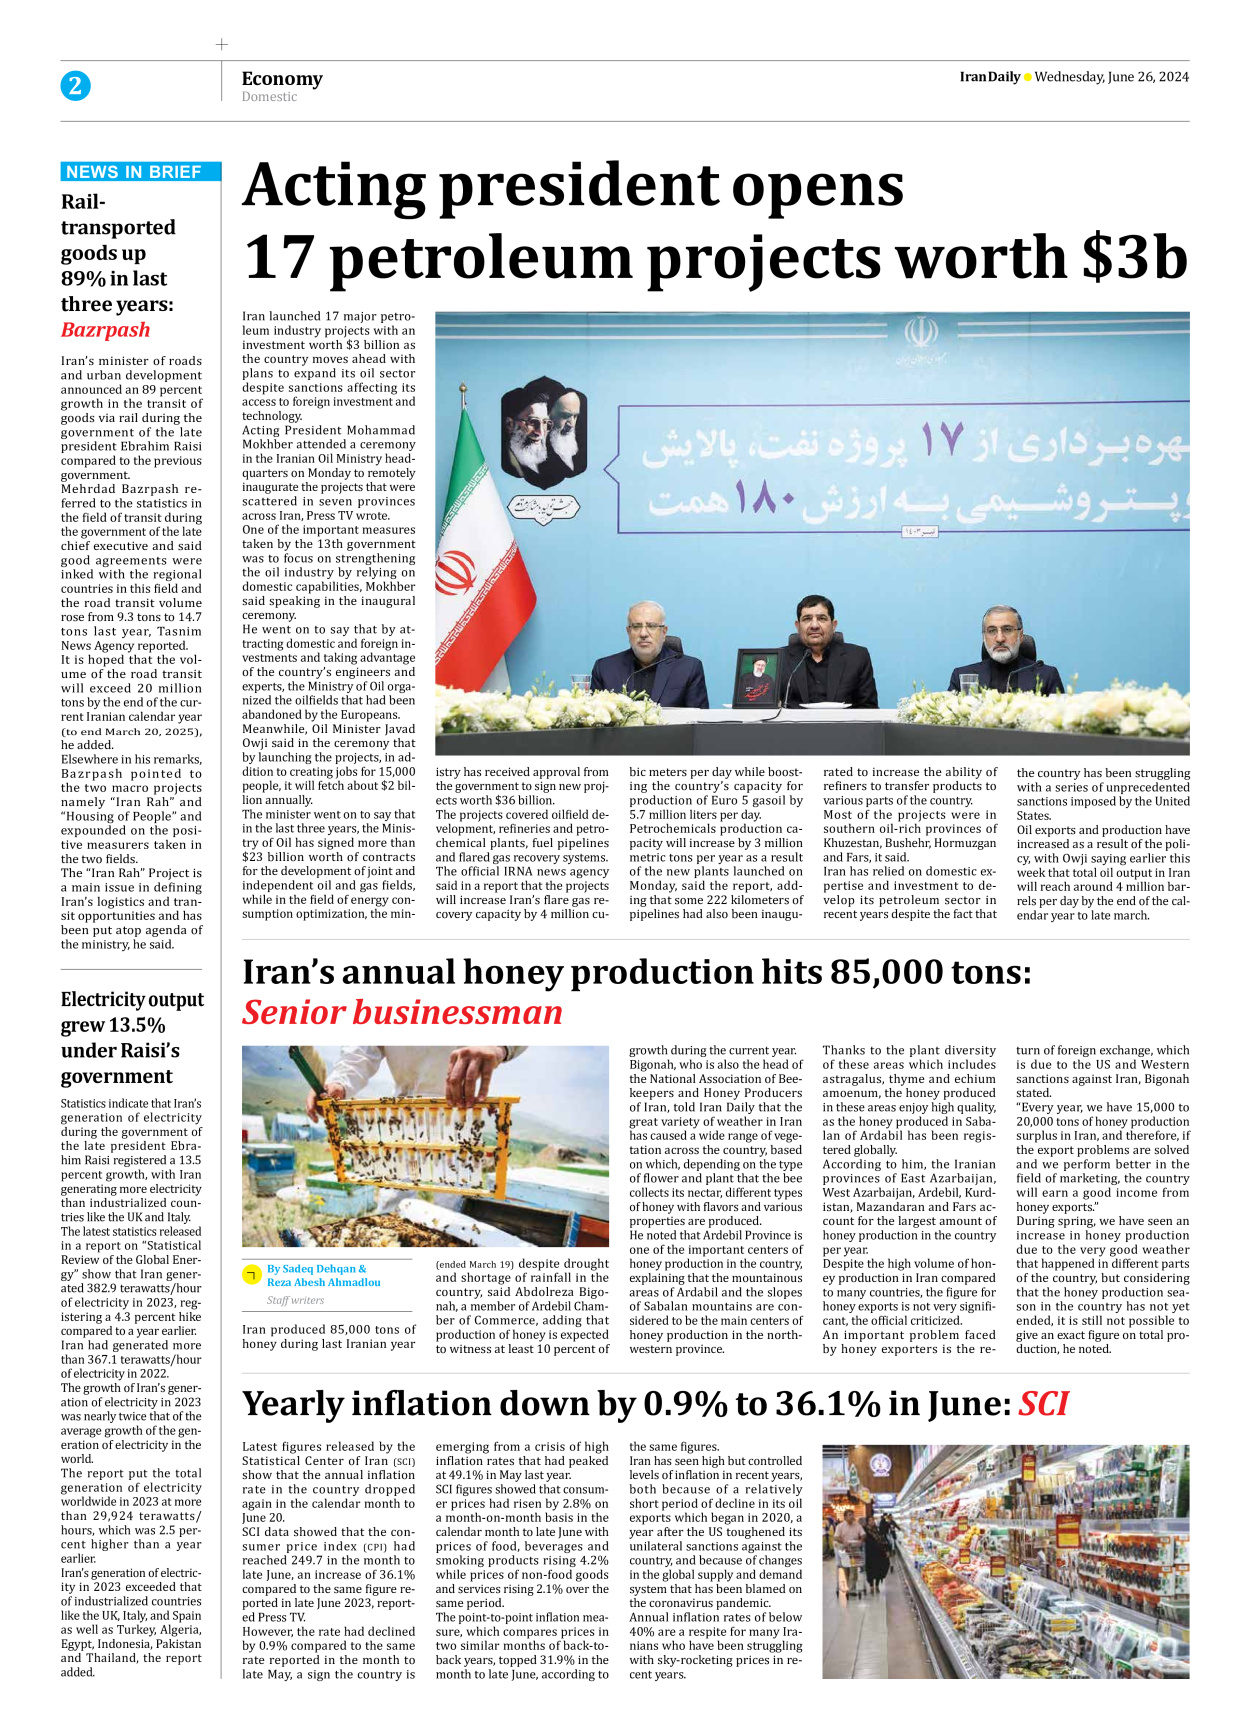 Iran Daily - Number Seven Thousand Five Hundred and Eighty Nine - 26 June 2024 - Page 2